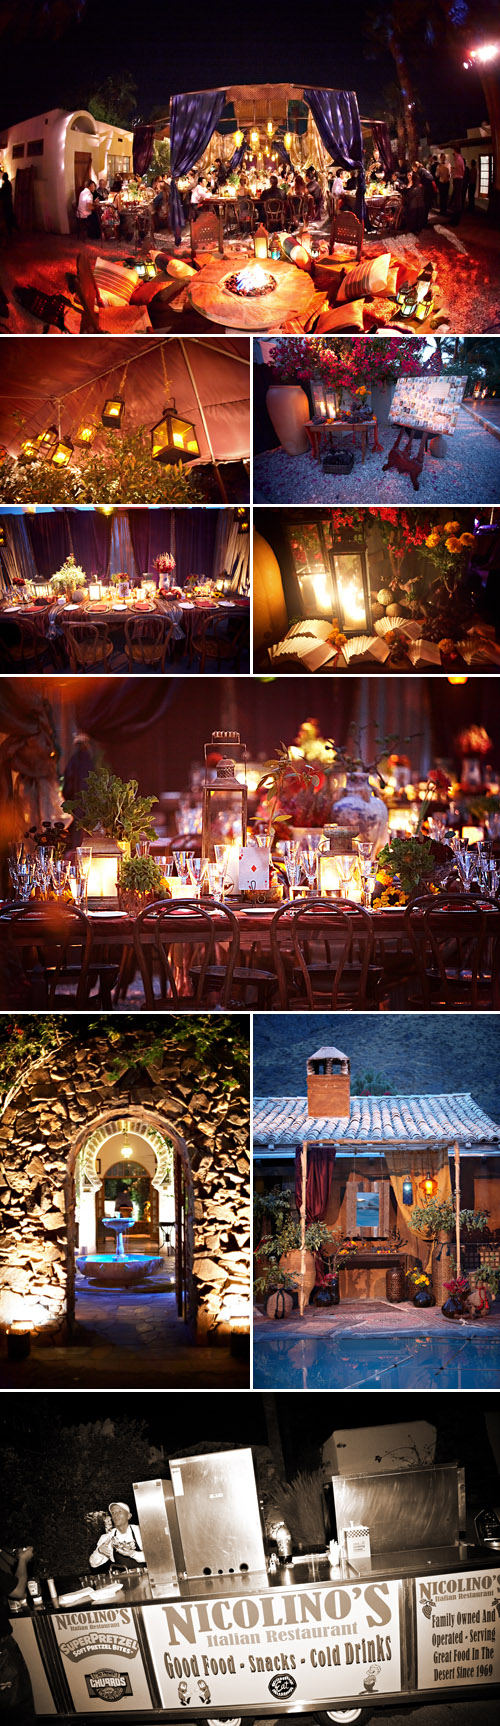 wedding decor inspired by exotic old-world nautical ports and gypsy travelers, event design, planning and production by Kristin Banta Events, photos by Miki & Sonja